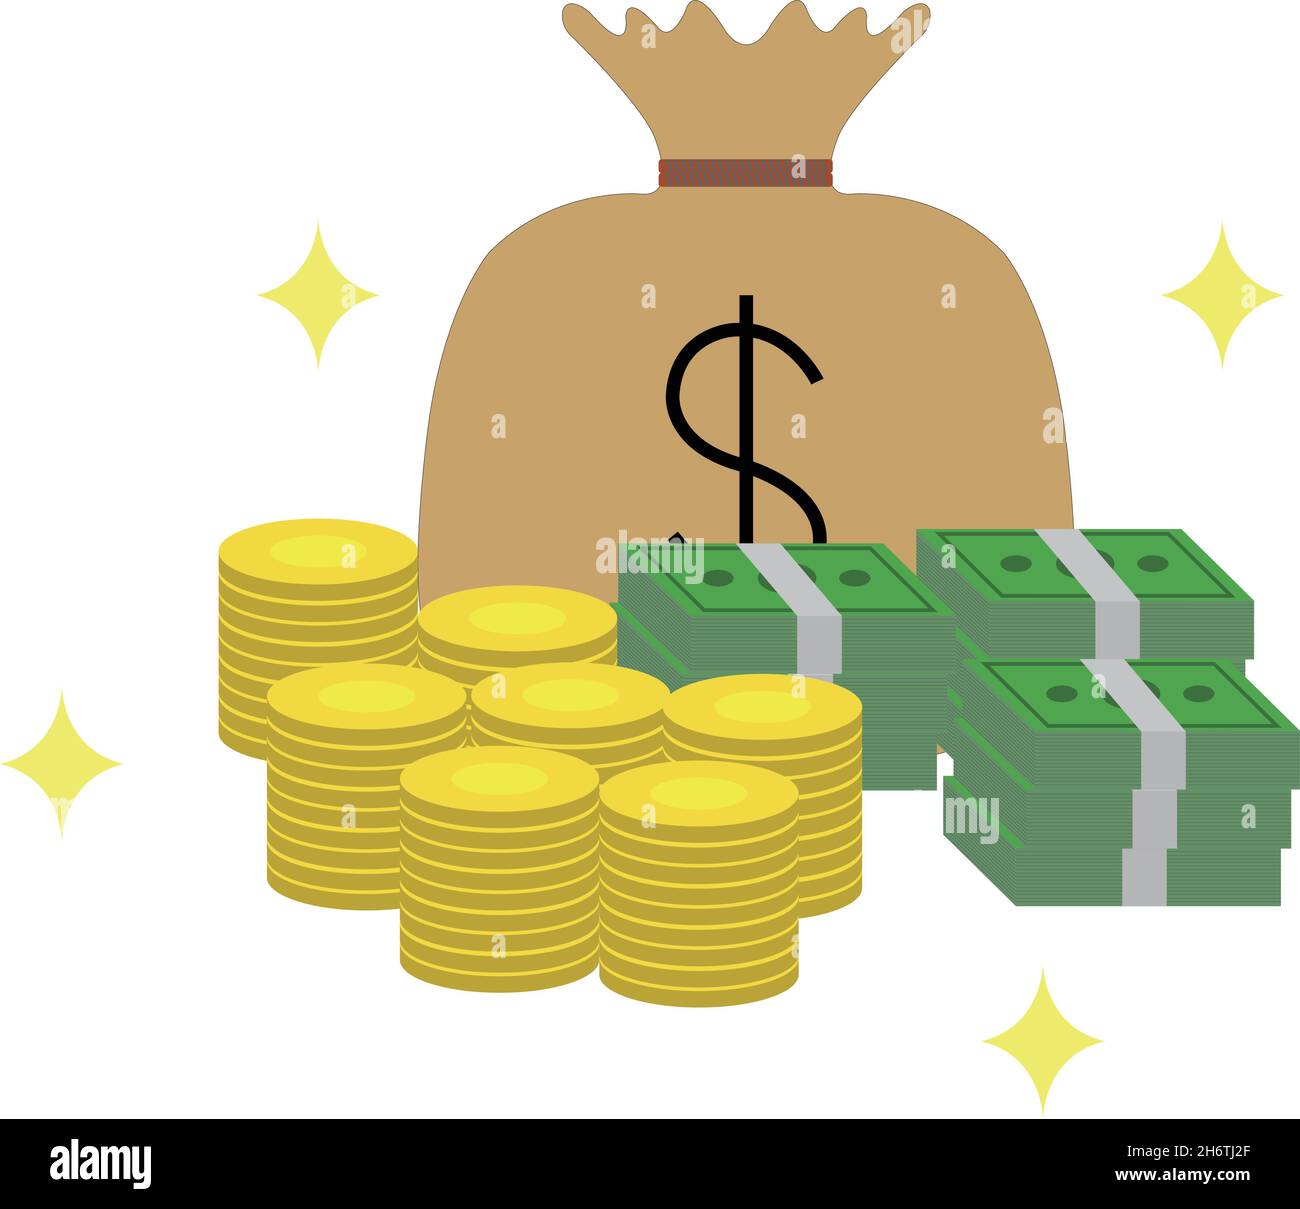 There is a lot of money piled up. It can be used to express wealth, debt, savings, etc. Stock Vector